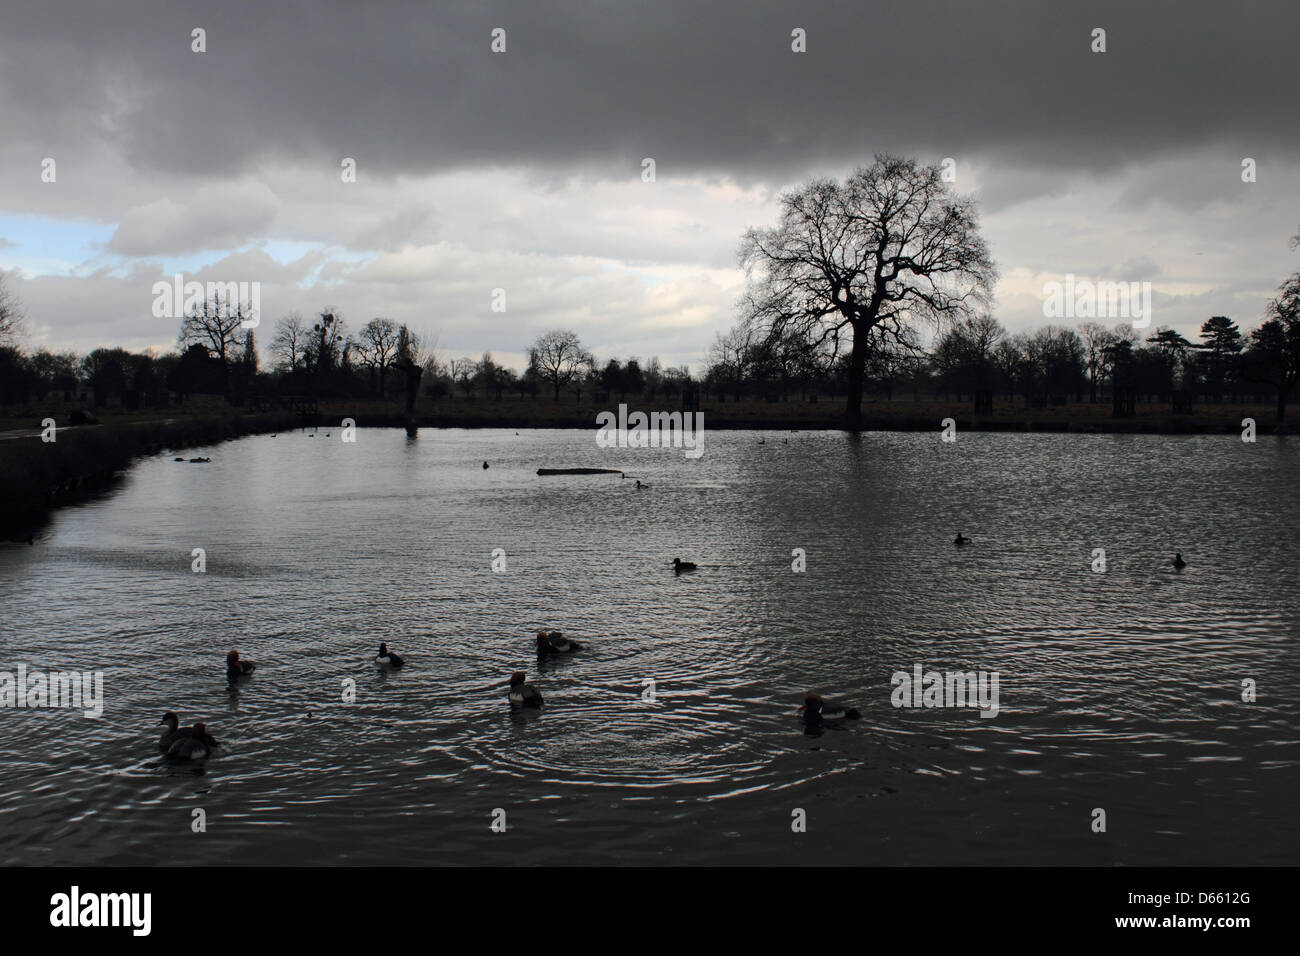 The Heron Pond in Bushy Park, SW London, England, UK.  12th April 2013. Stormy skies and heavy showers were the latest weather conditions in Southern England today. Credit: Julia Gavin / Alamy Live News Stock Photo